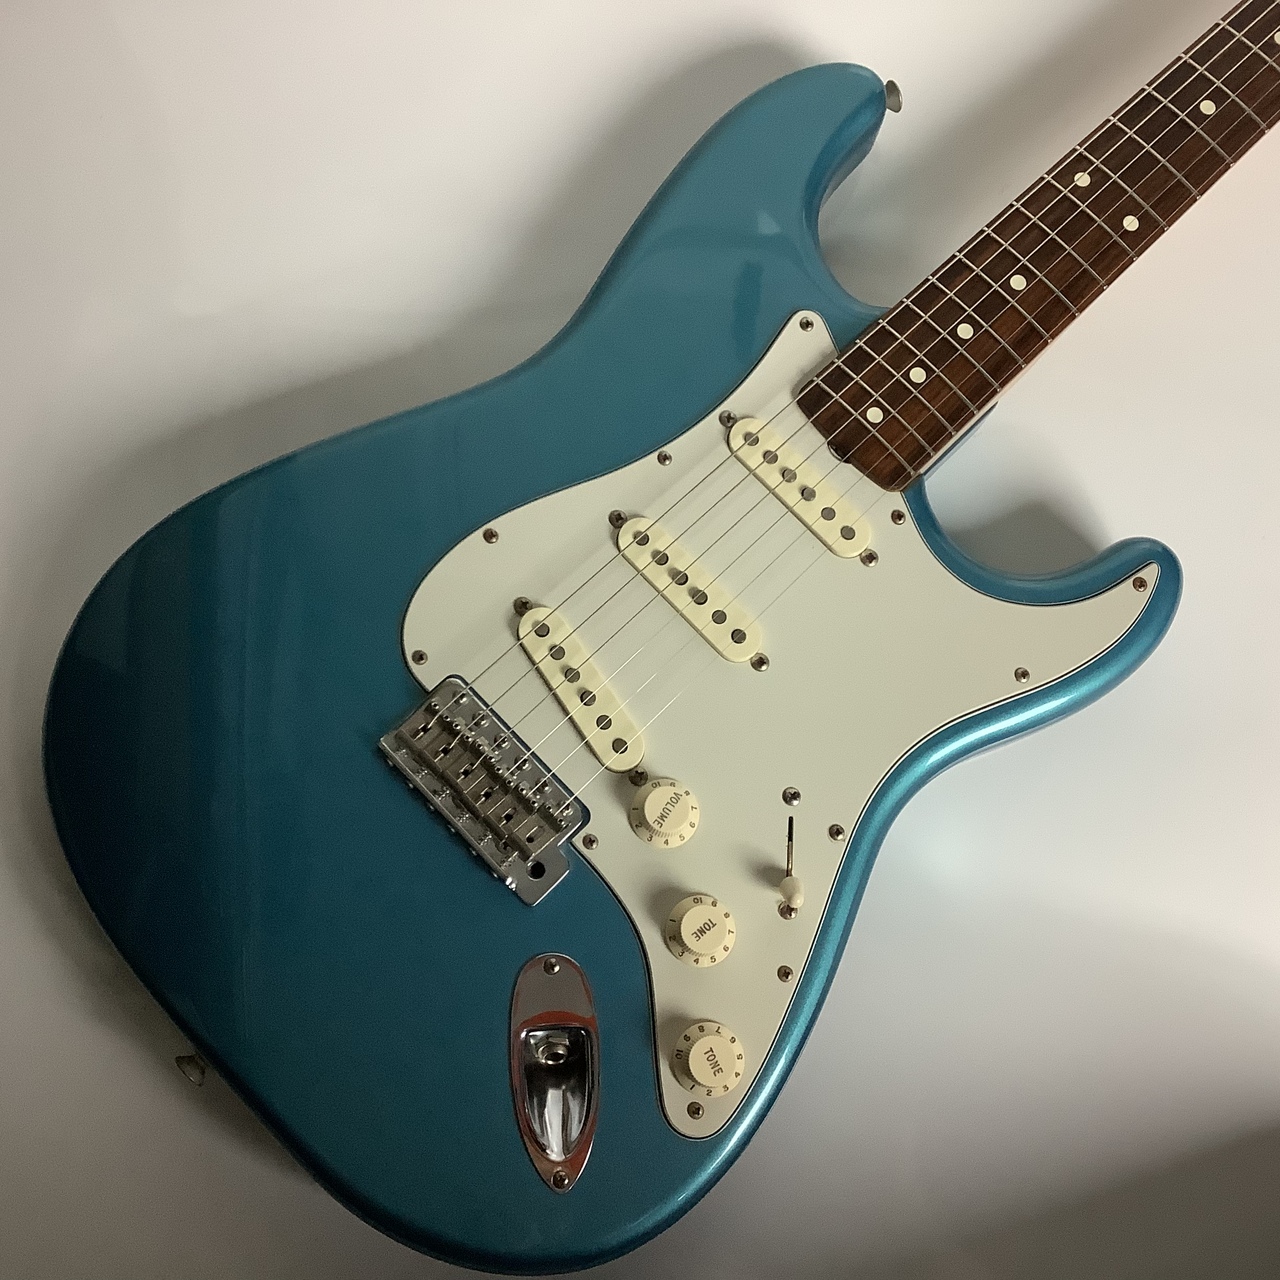 Fender Mexico classic series 60s確認ですが - ギター